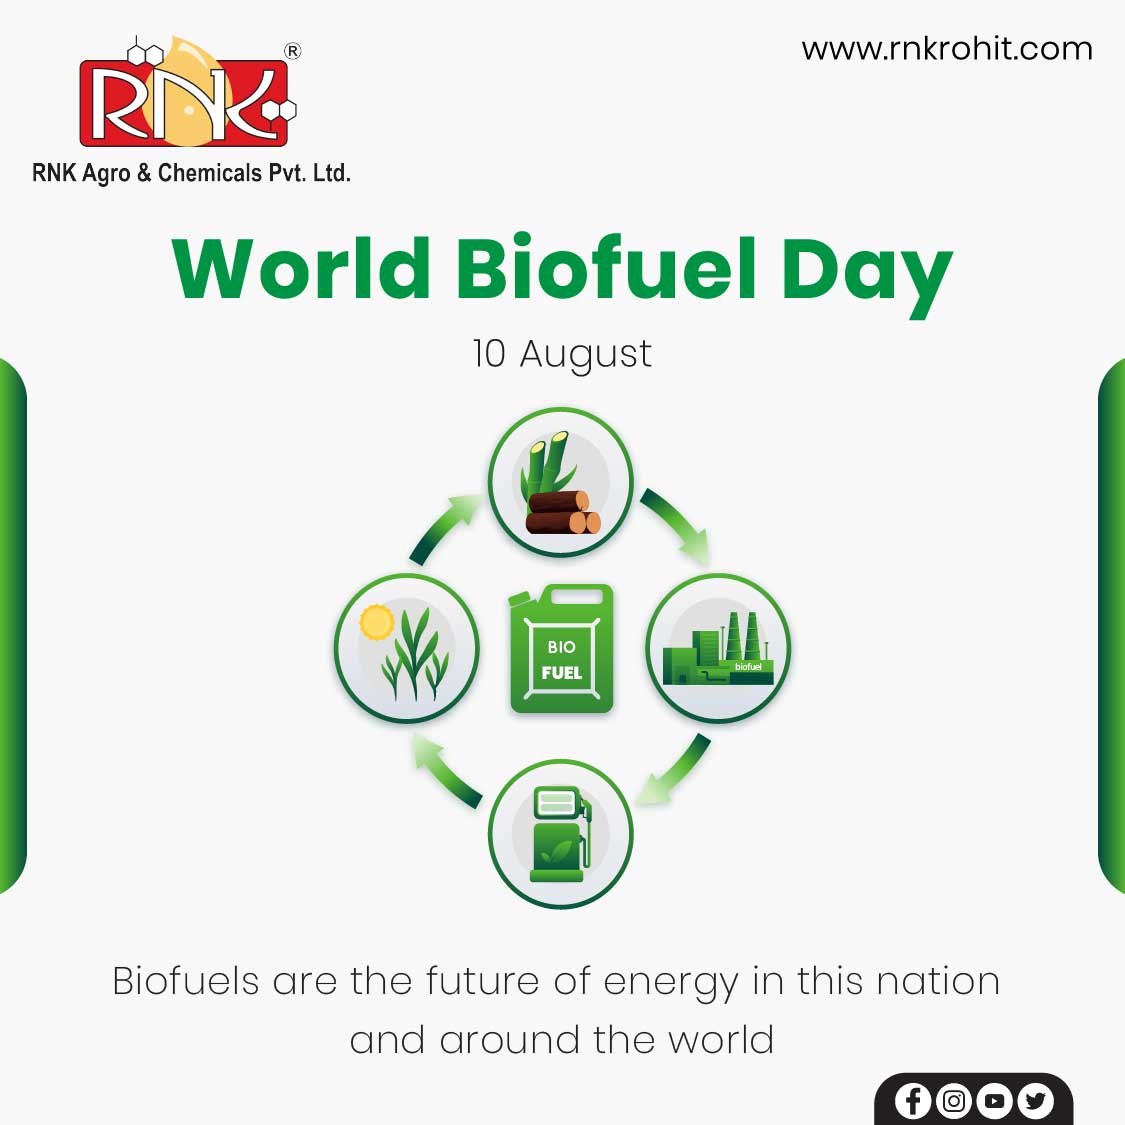 Biofuels are the future of energy in this nation and around the world.
World Biofuel Day!
#WorldBiofuelDay #WorldBiofuelDay2023 #SaveBiofuel #Biofuel #SaveEarth #Fuel